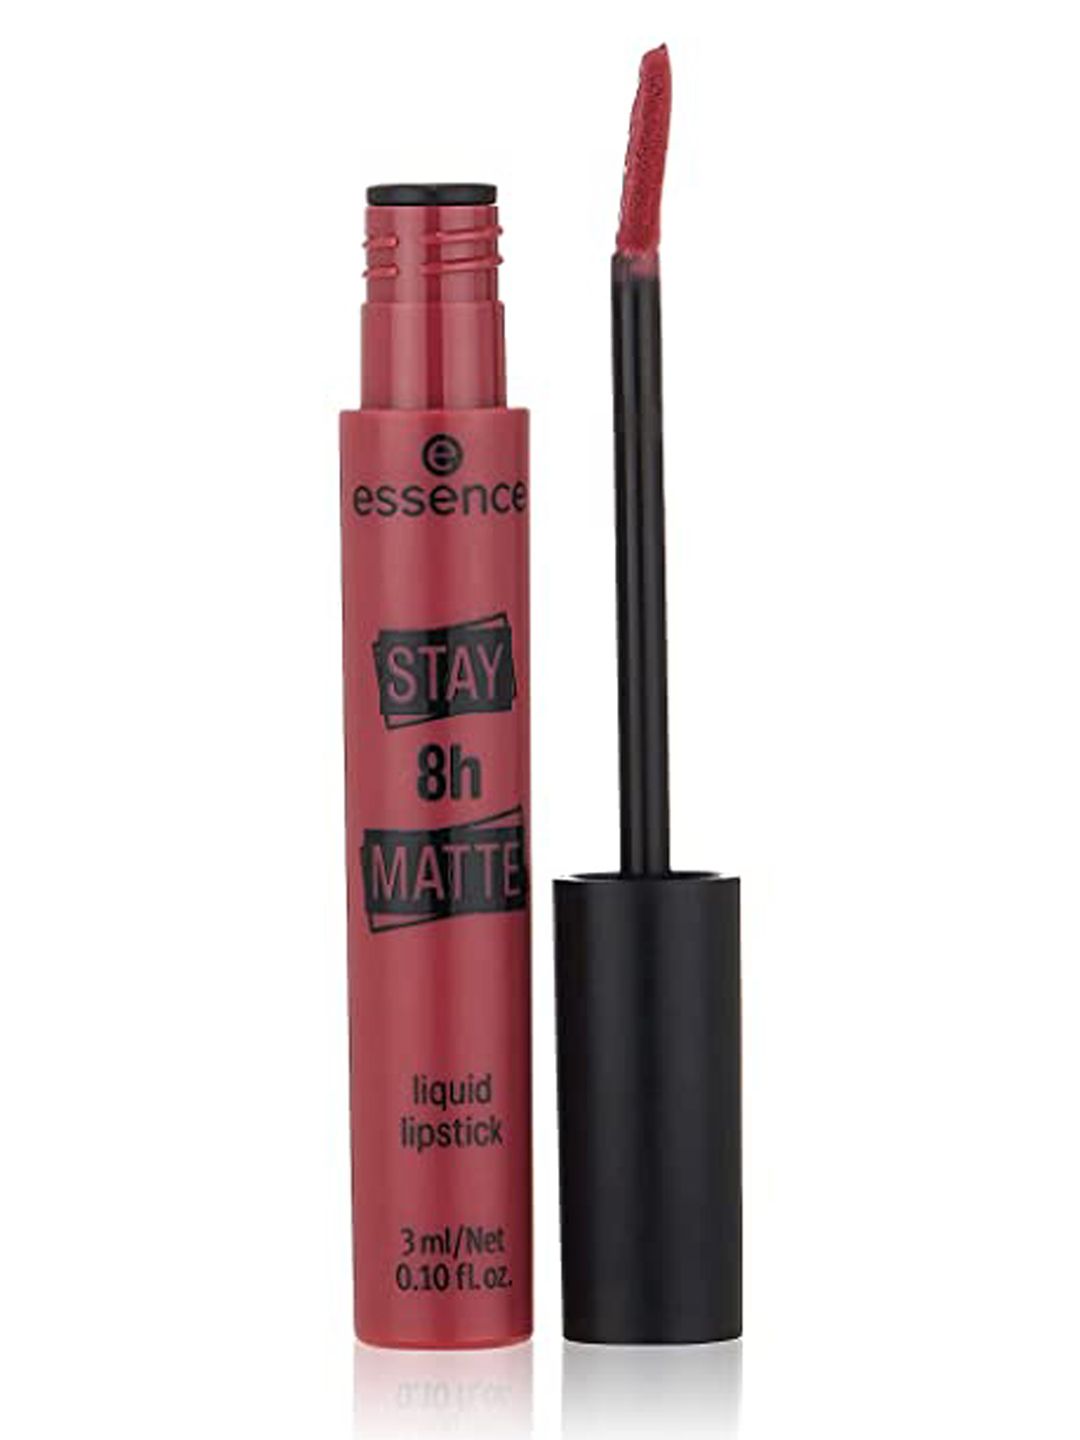 essence Stay 8H Matte Vegan Mask Proof Liquid Lipstick 3 ml - Let's Chill 07 Price in India